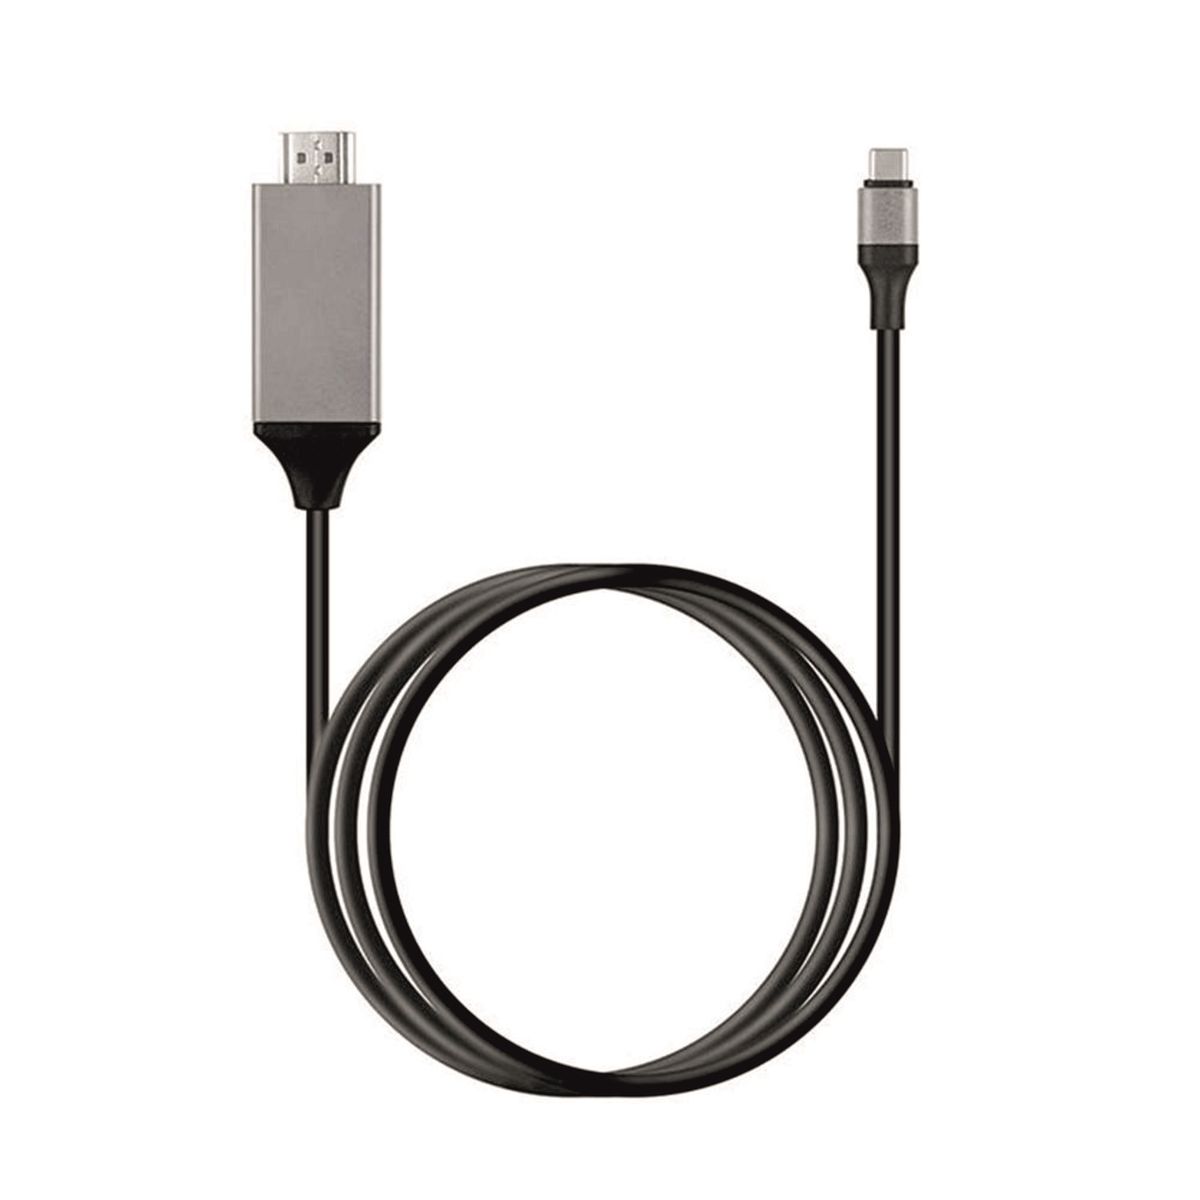 USB Type C to HDMI Cable - 2m, Shop Today. Get it Tomorrow!